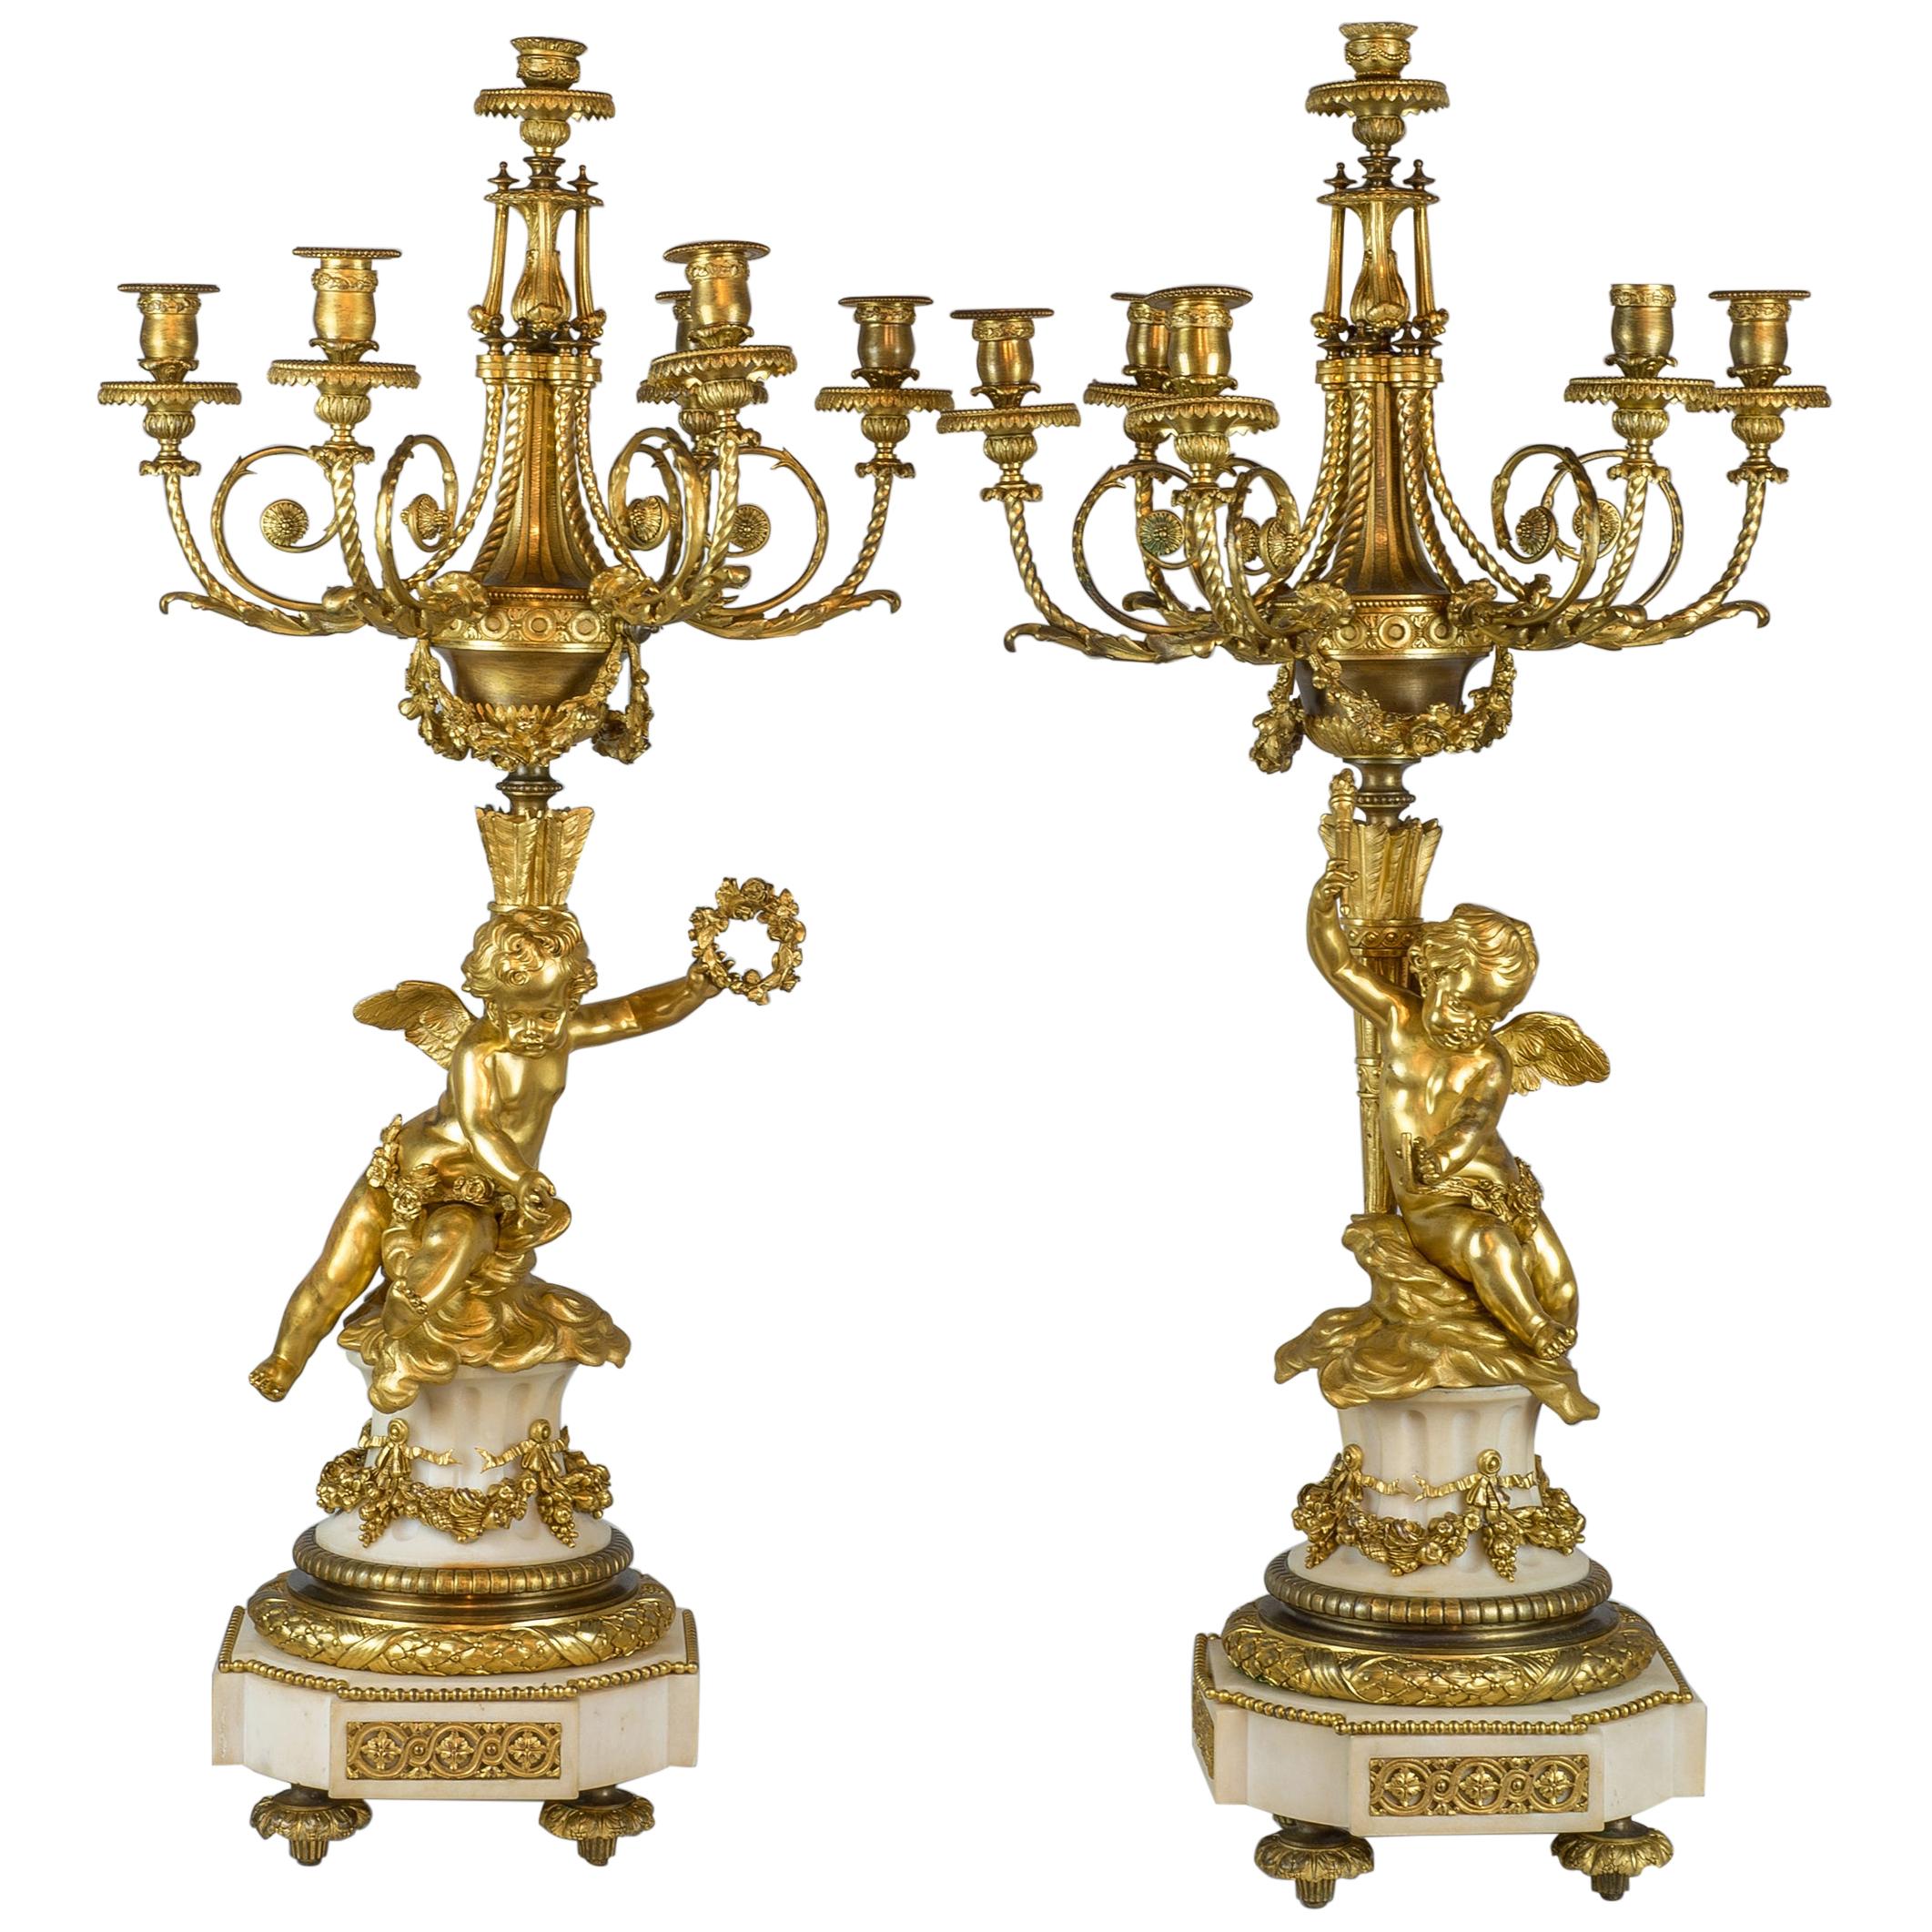 Fine Quality Pair of Ormolu and White Marble Six-Light Candelabras